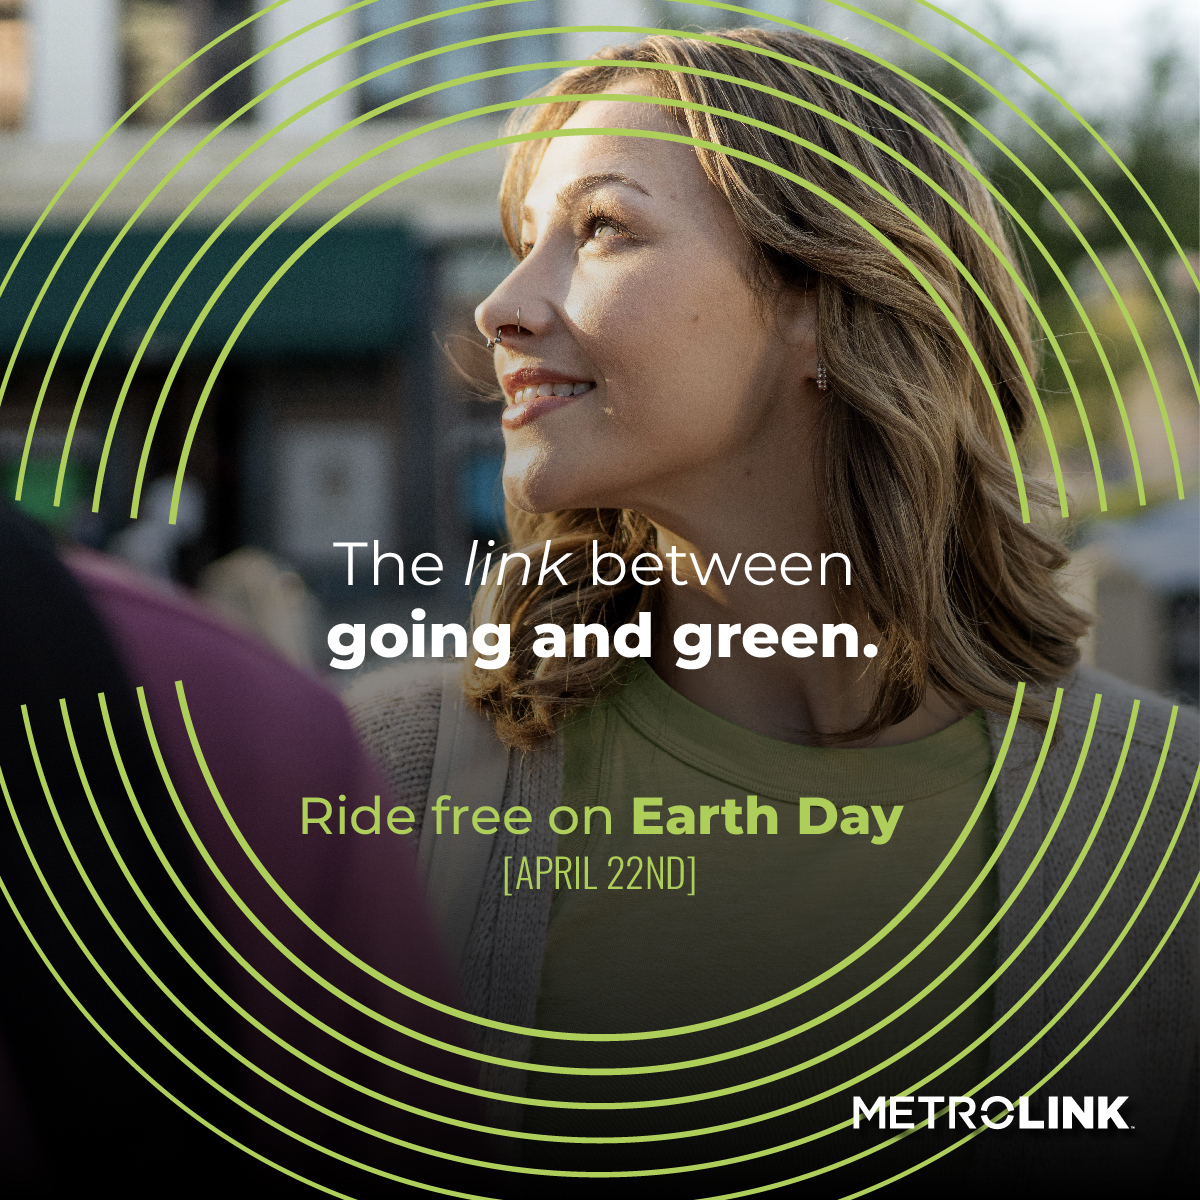 What’s good for the Earth is good for you! Ride FREE this #EarthDay, April 22 on all Metrolink lines. No ticket needed…pick your destination and just hop aboard. Learn More: metrol.ink/3wAxThX